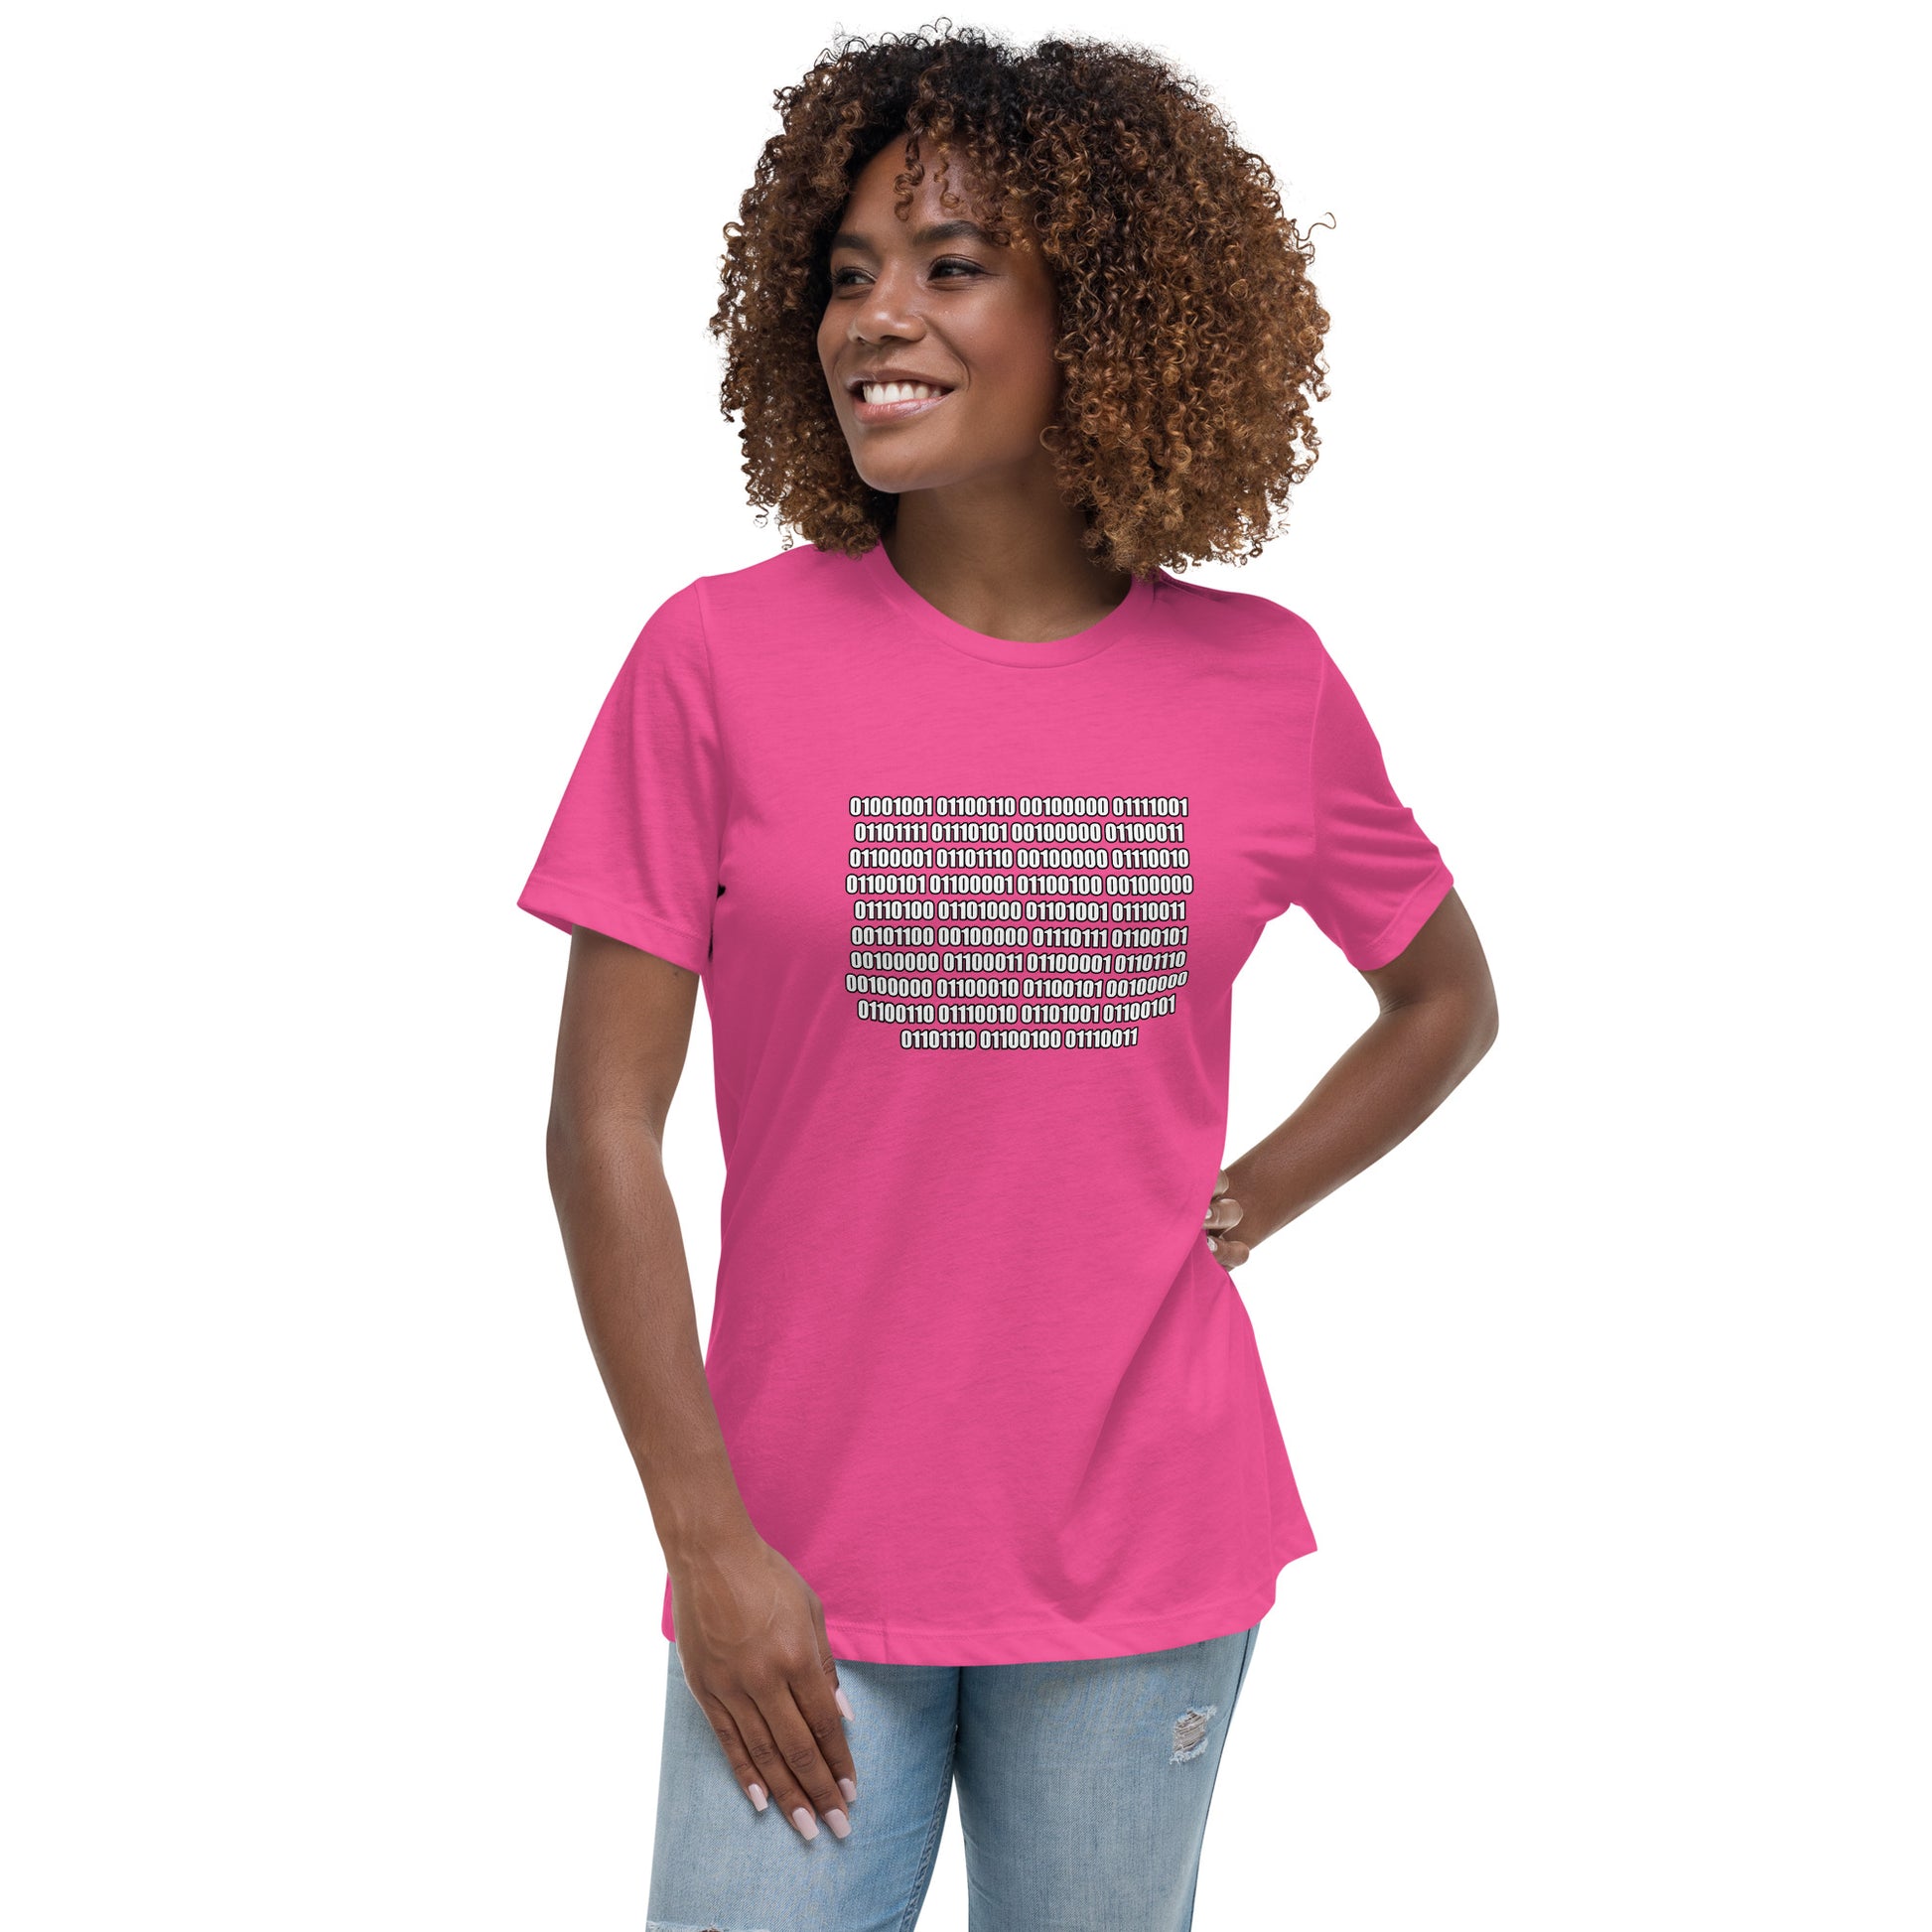 Woman with berry t-shirt with binary code "If you can read this"